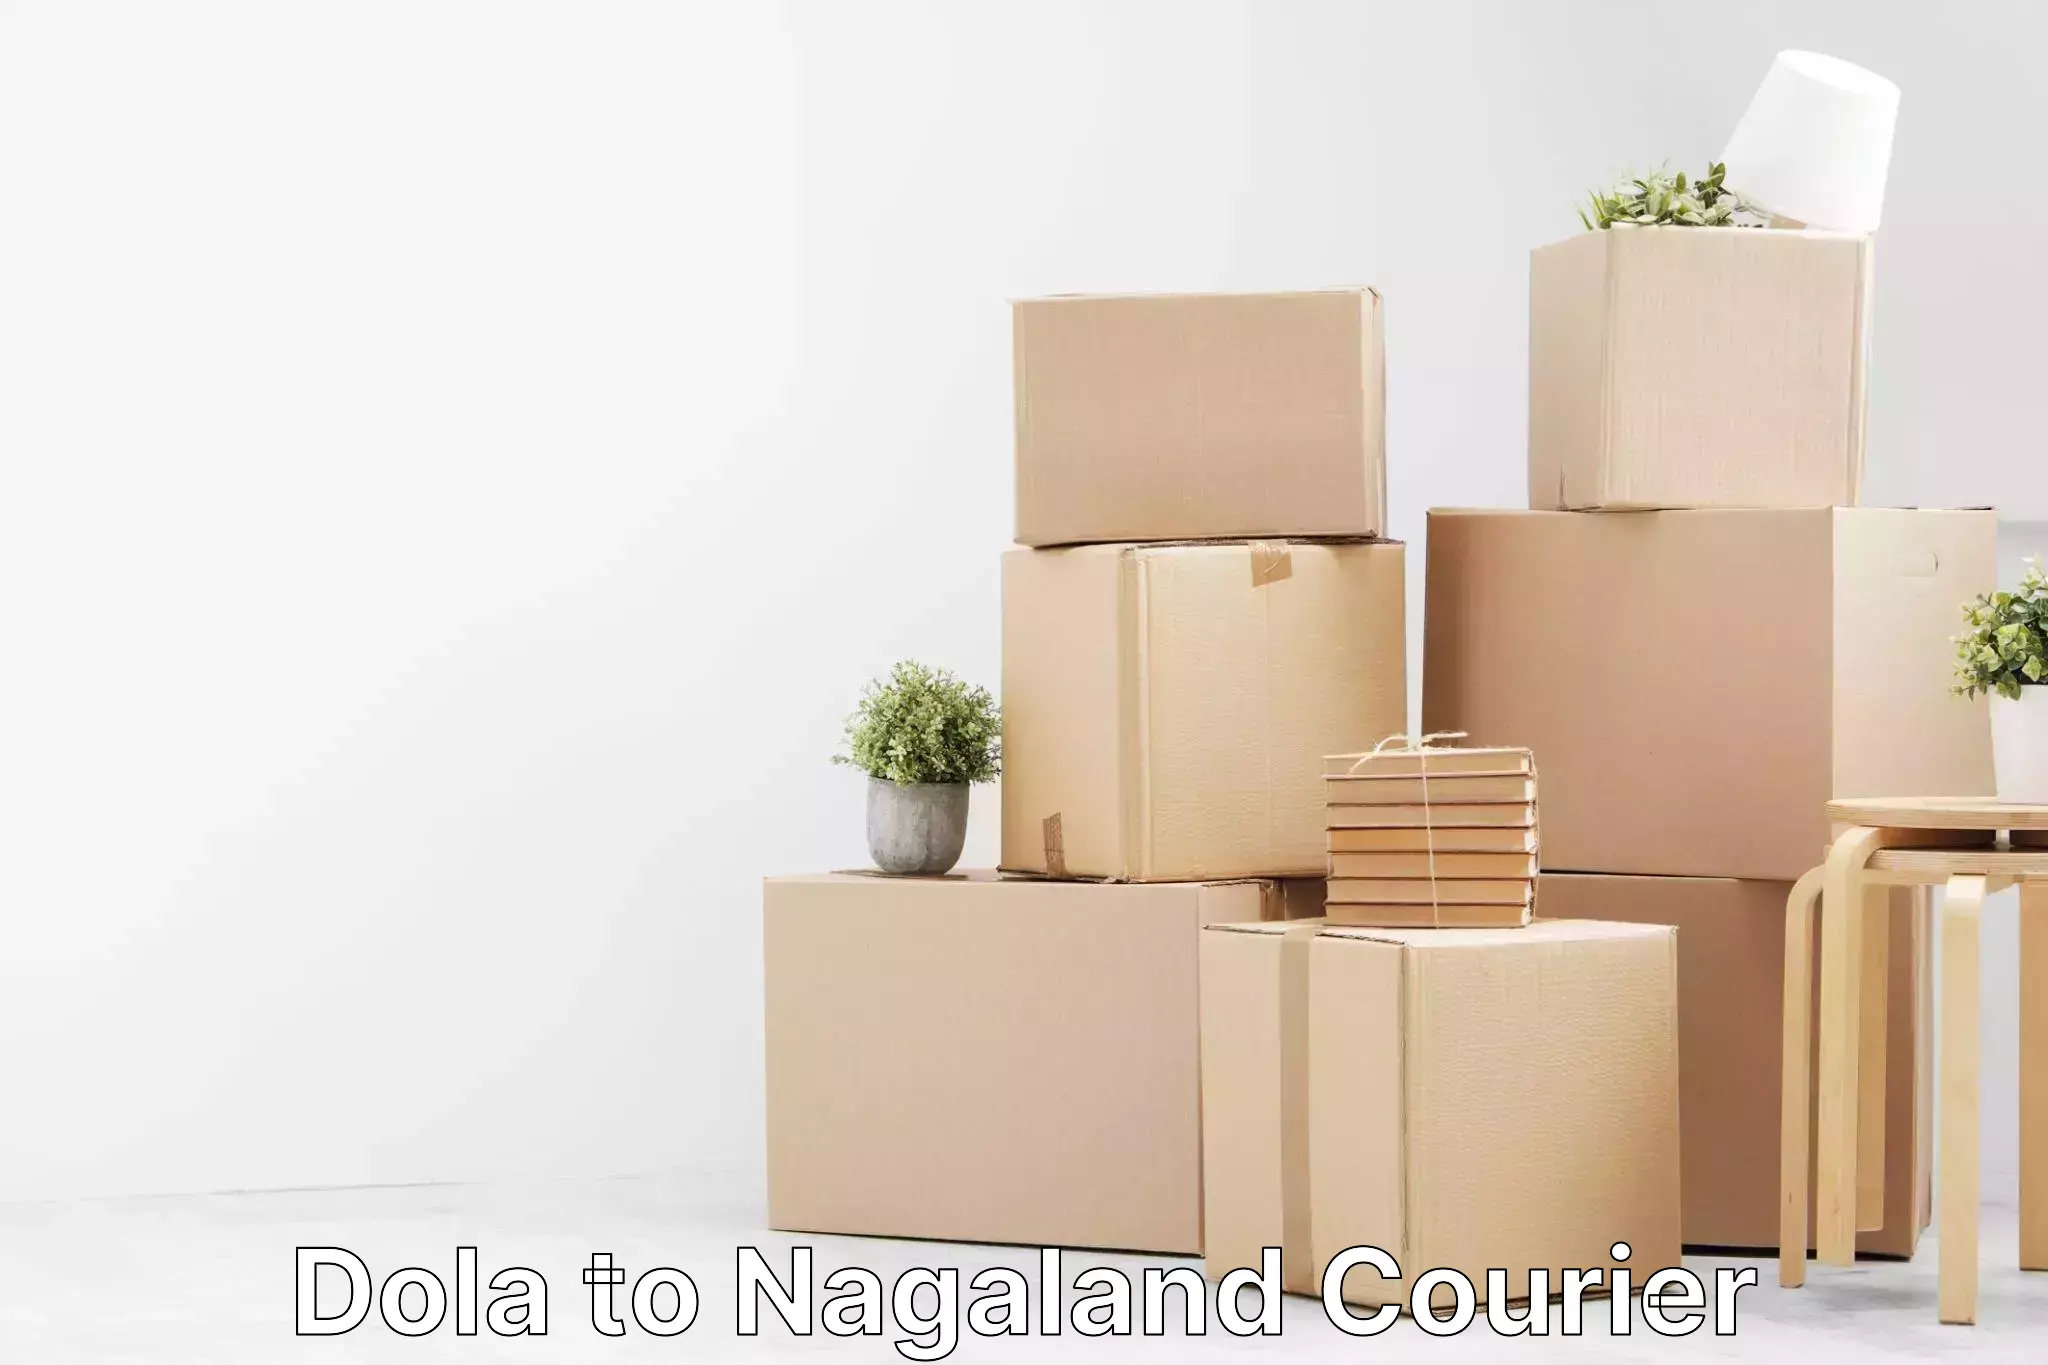 Local delivery service Dola to Nagaland